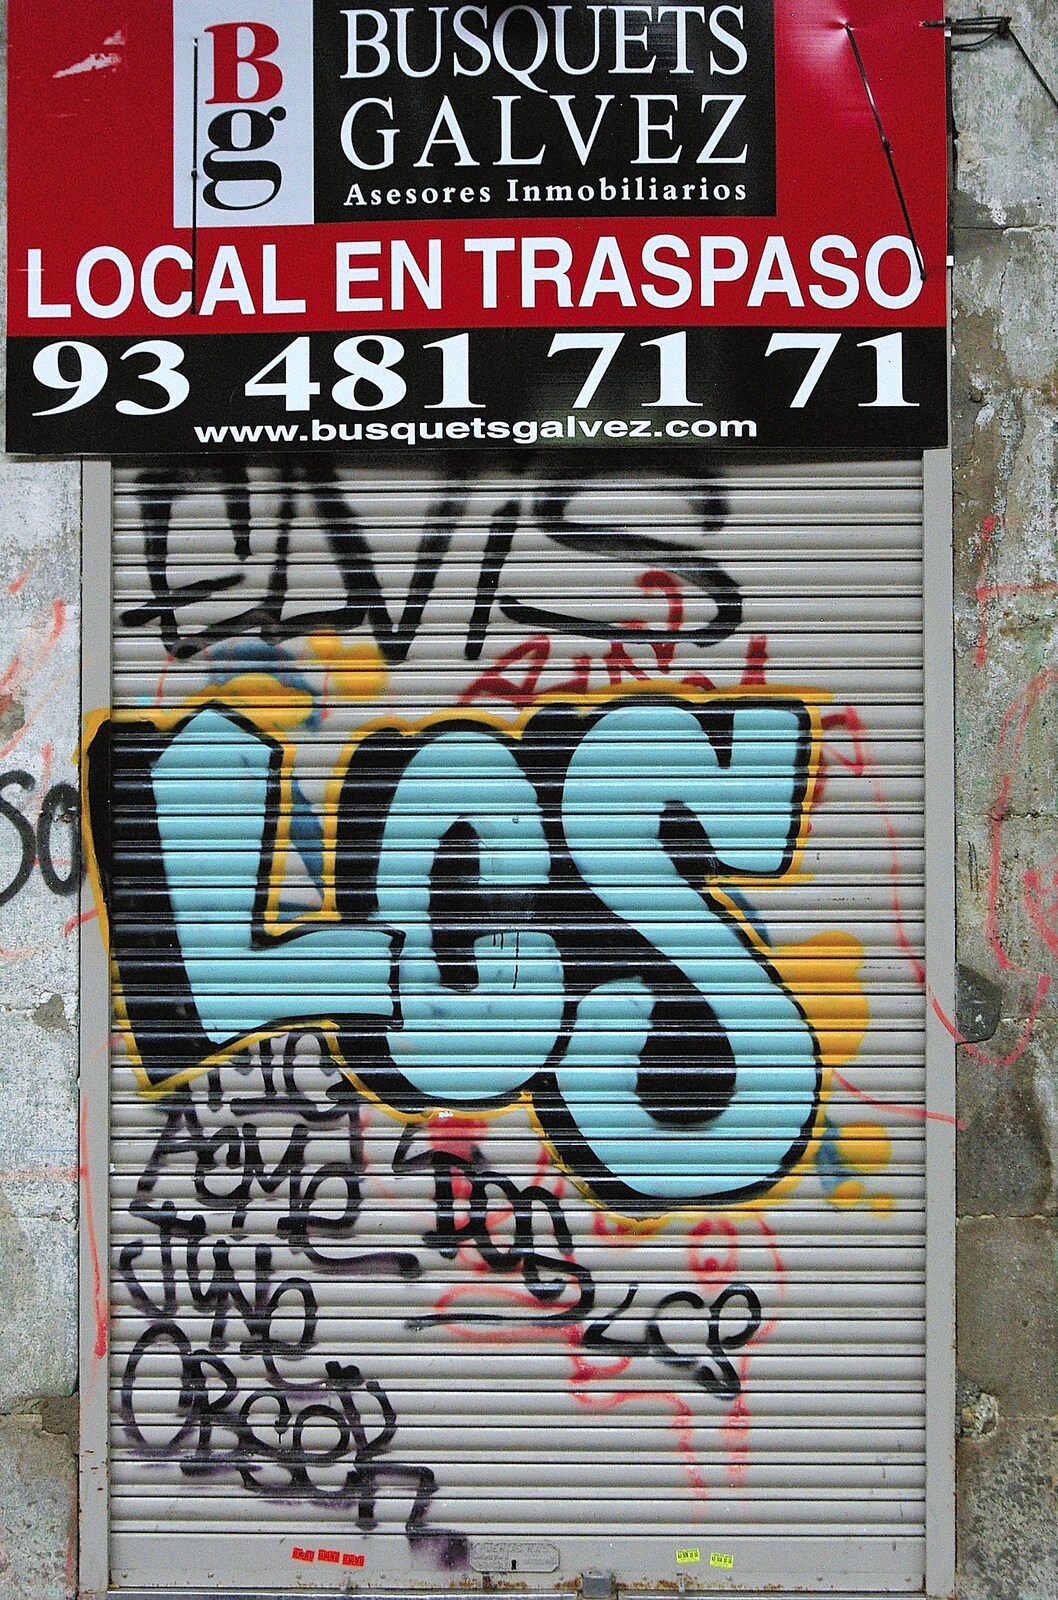 More graffiti from Two Days in Barcelona, Catalunya, Spain - 22nd September 2006